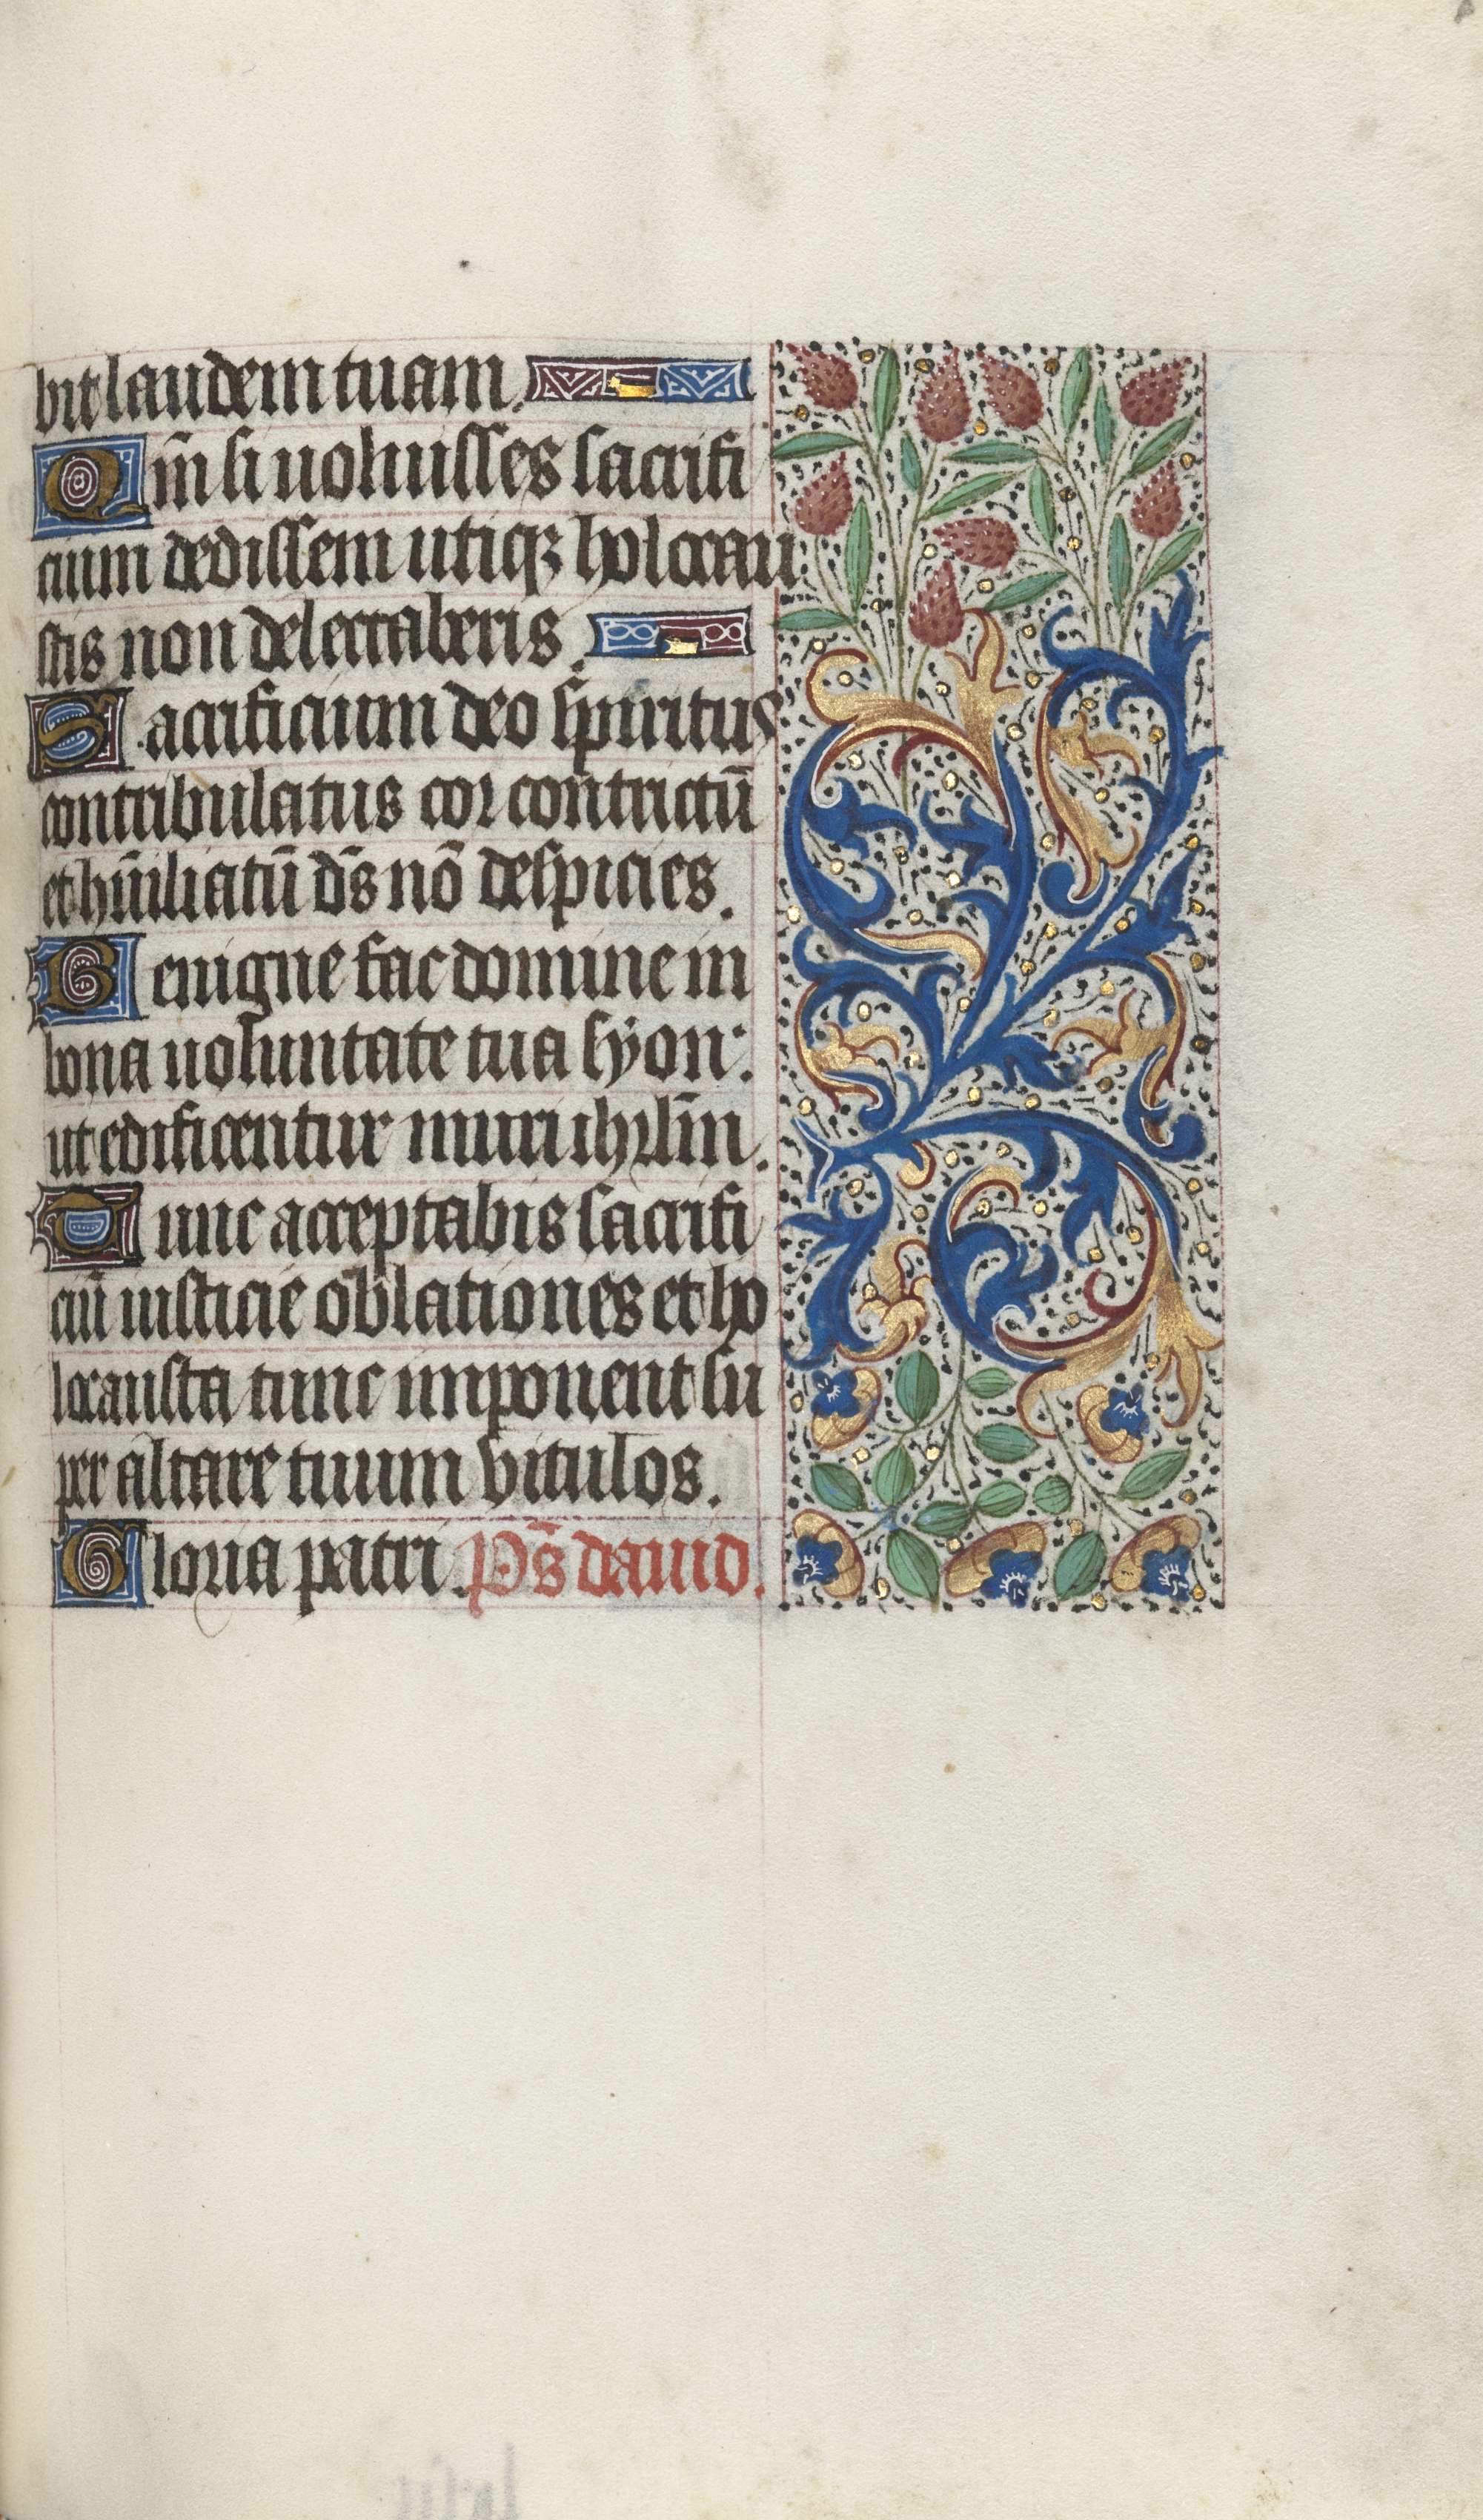 Book of Hours (Use of Rouen): fol. 87r